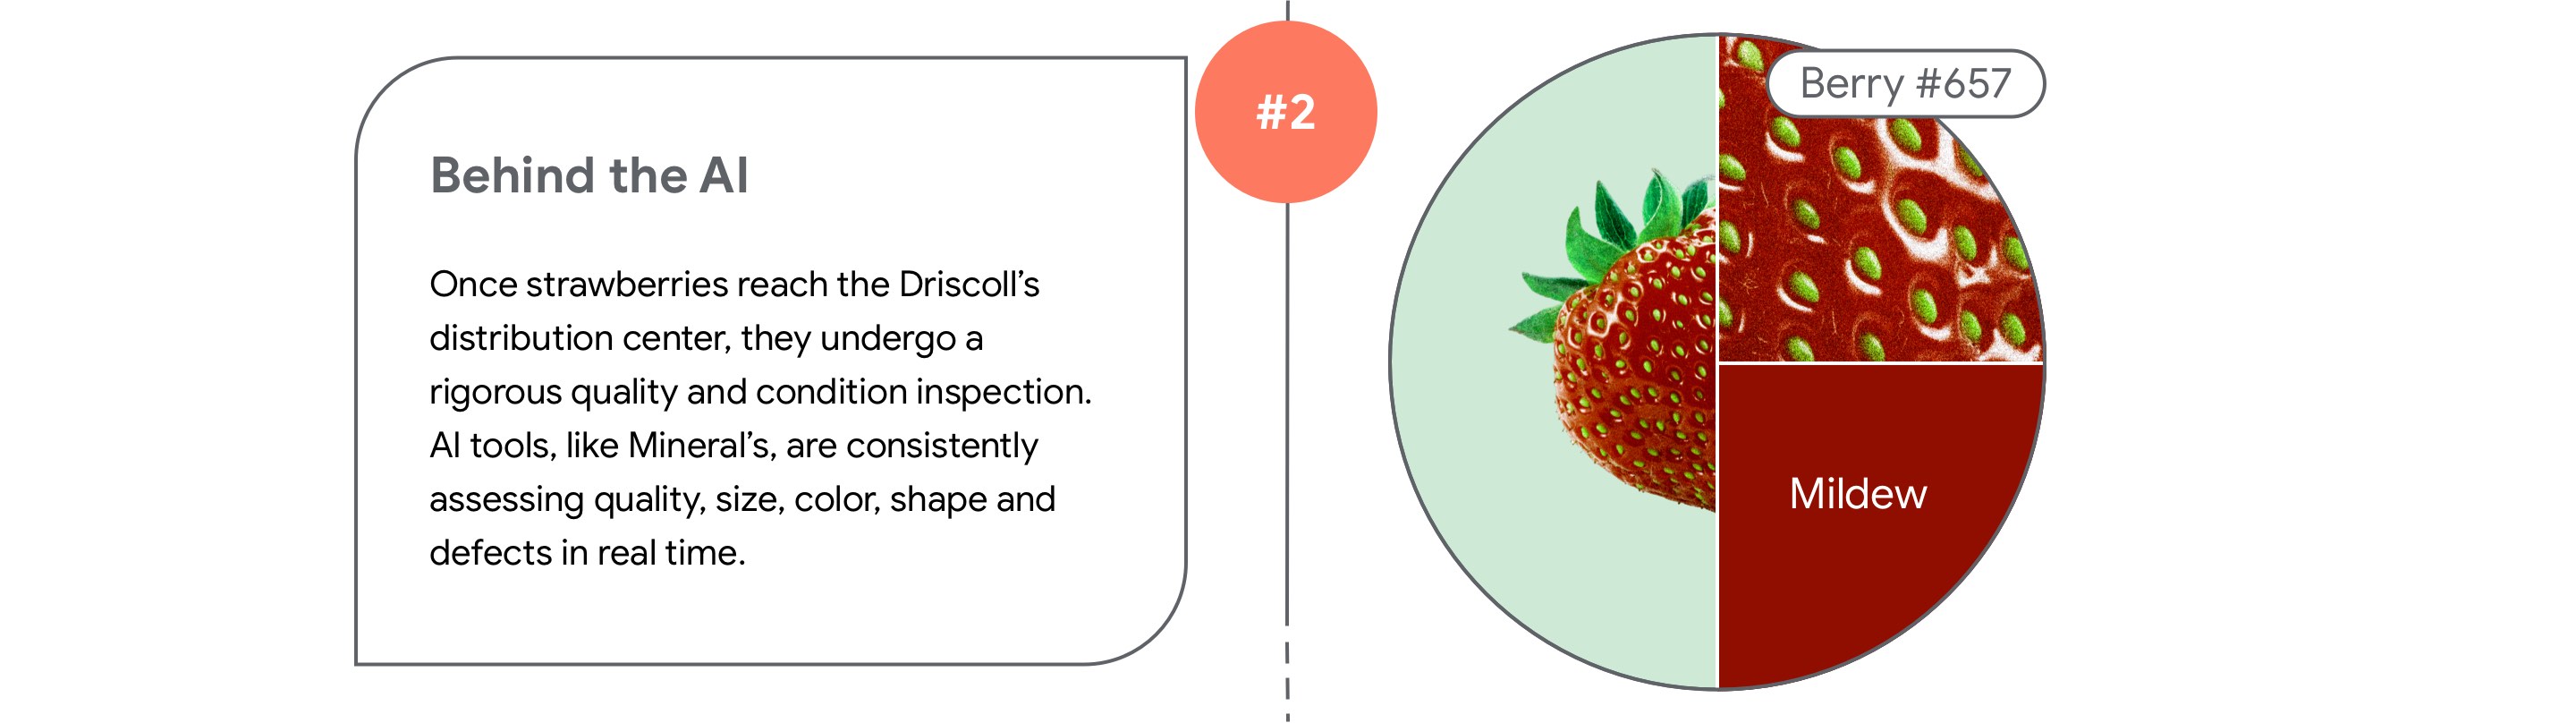 Behind the AI  Once strawberries reach the Driscoll’s distribution center, they undergo a rigorous quality and condition inspection. AI tools, like Mineral’s, are consistently assessing quality, size, color, shape and defects in real time.